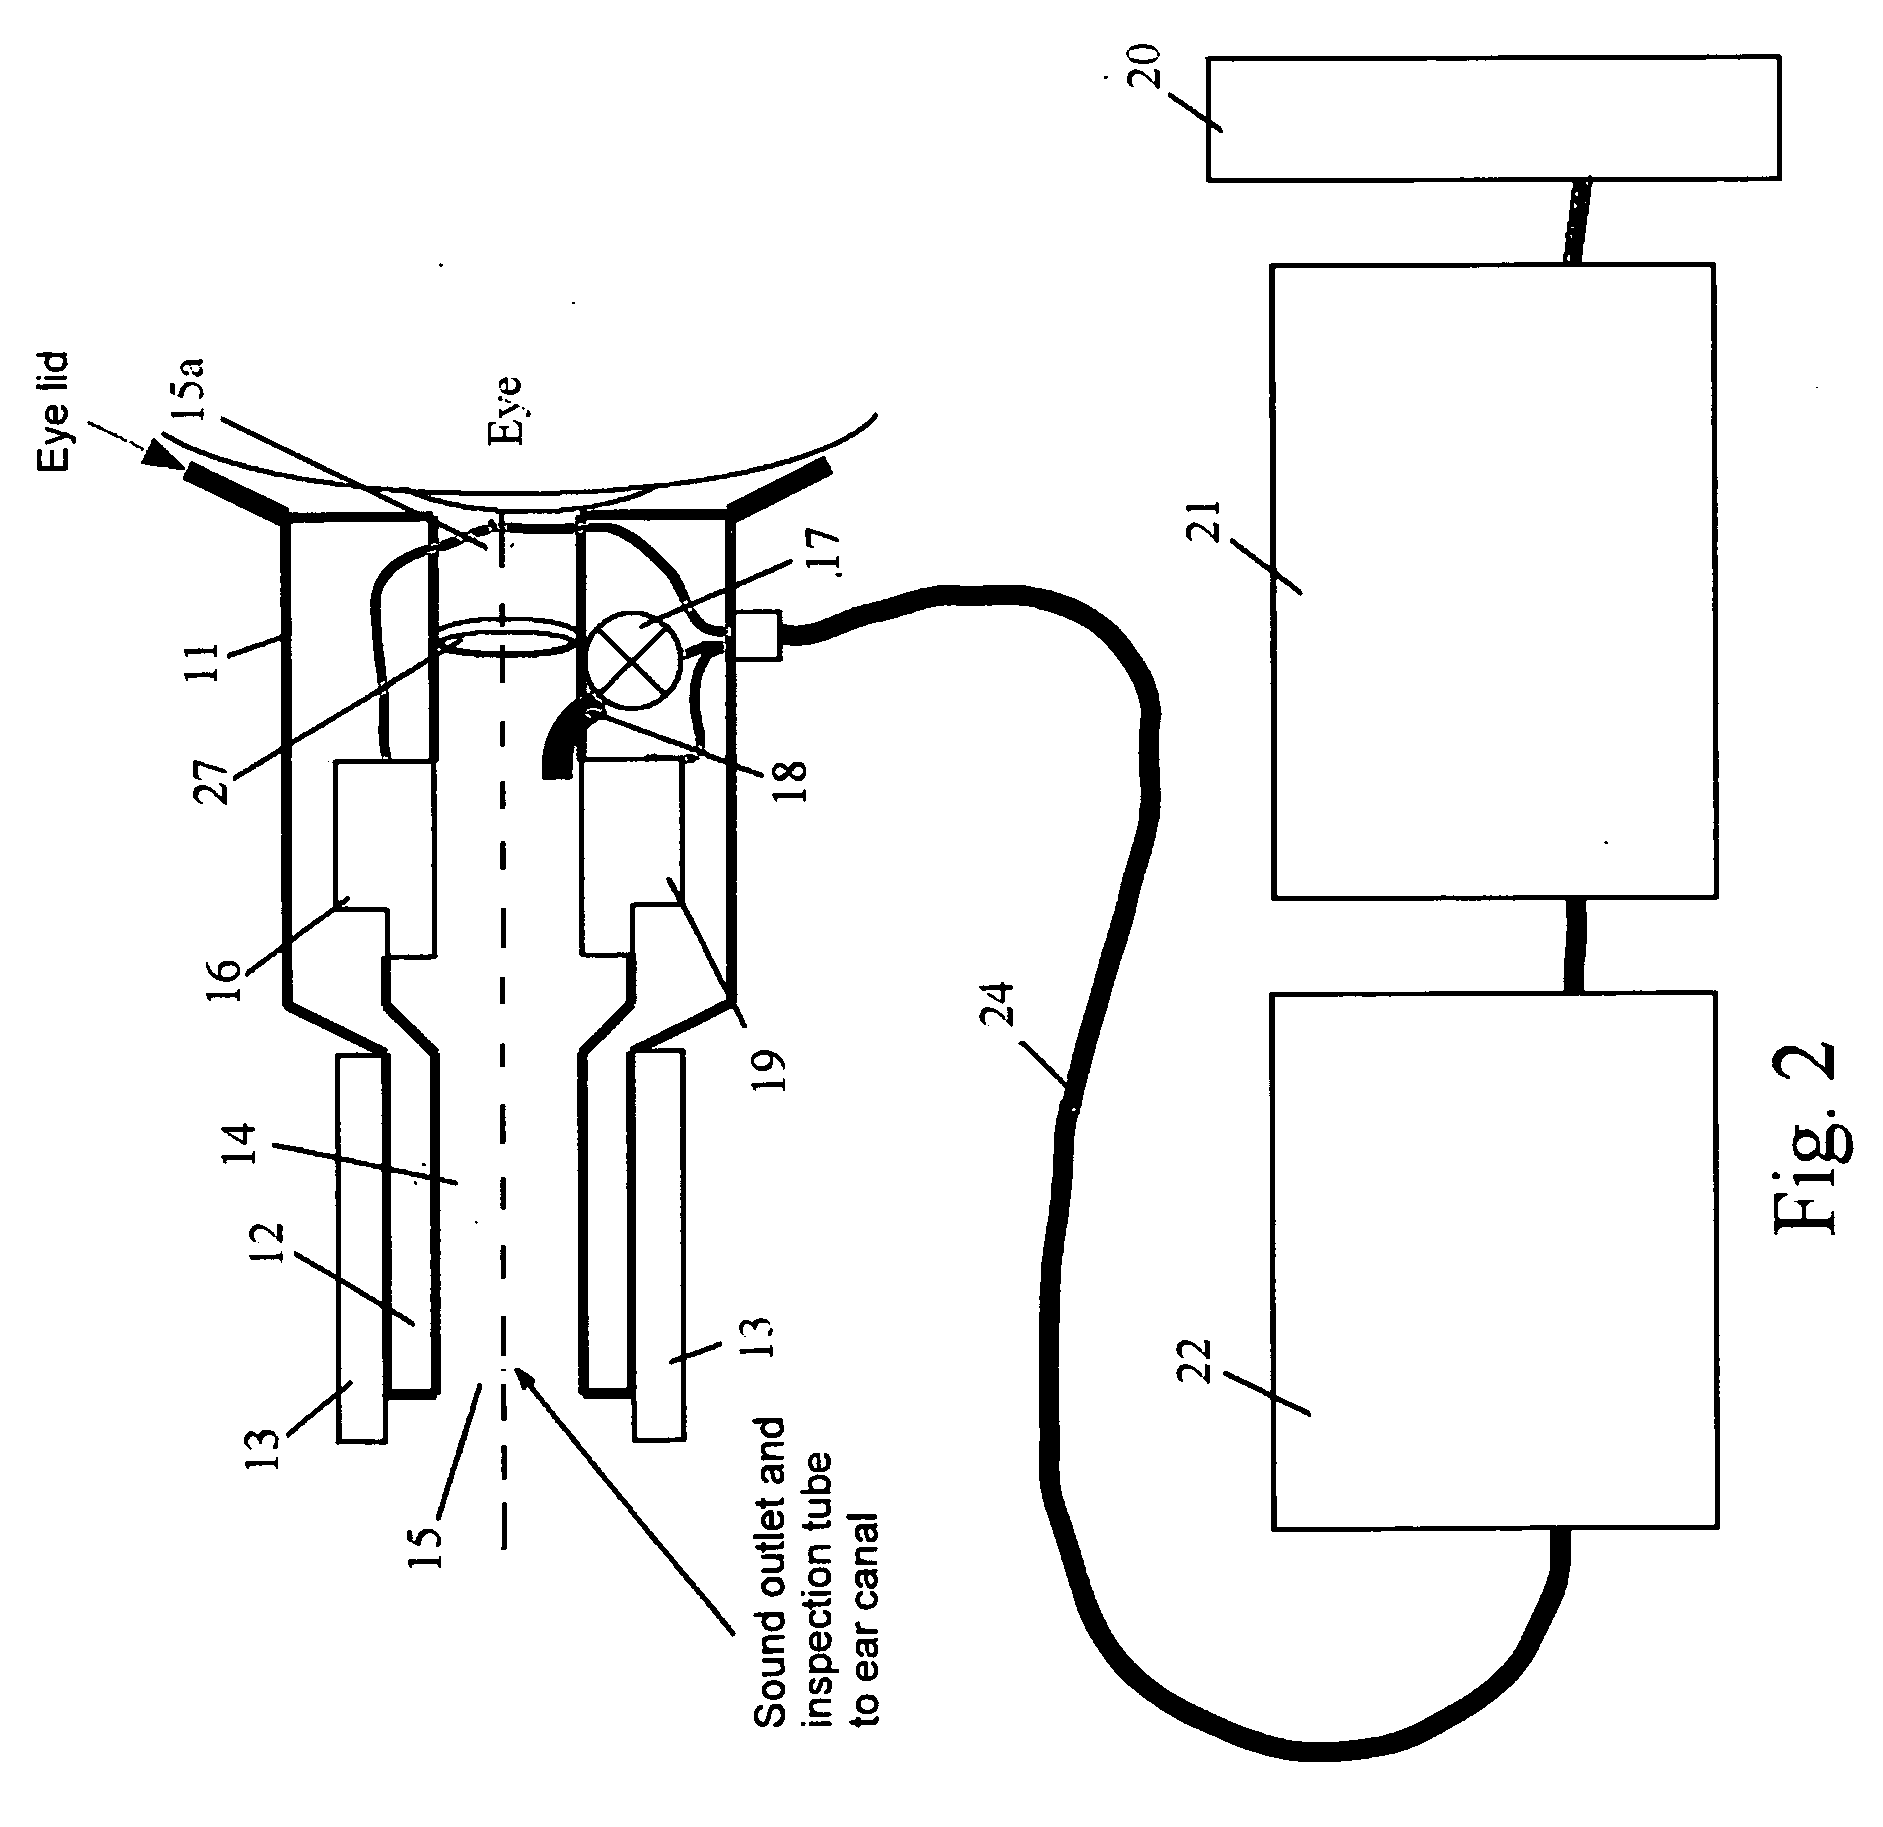 Ear canal obstruction detecting acoustical stimulation ear probe